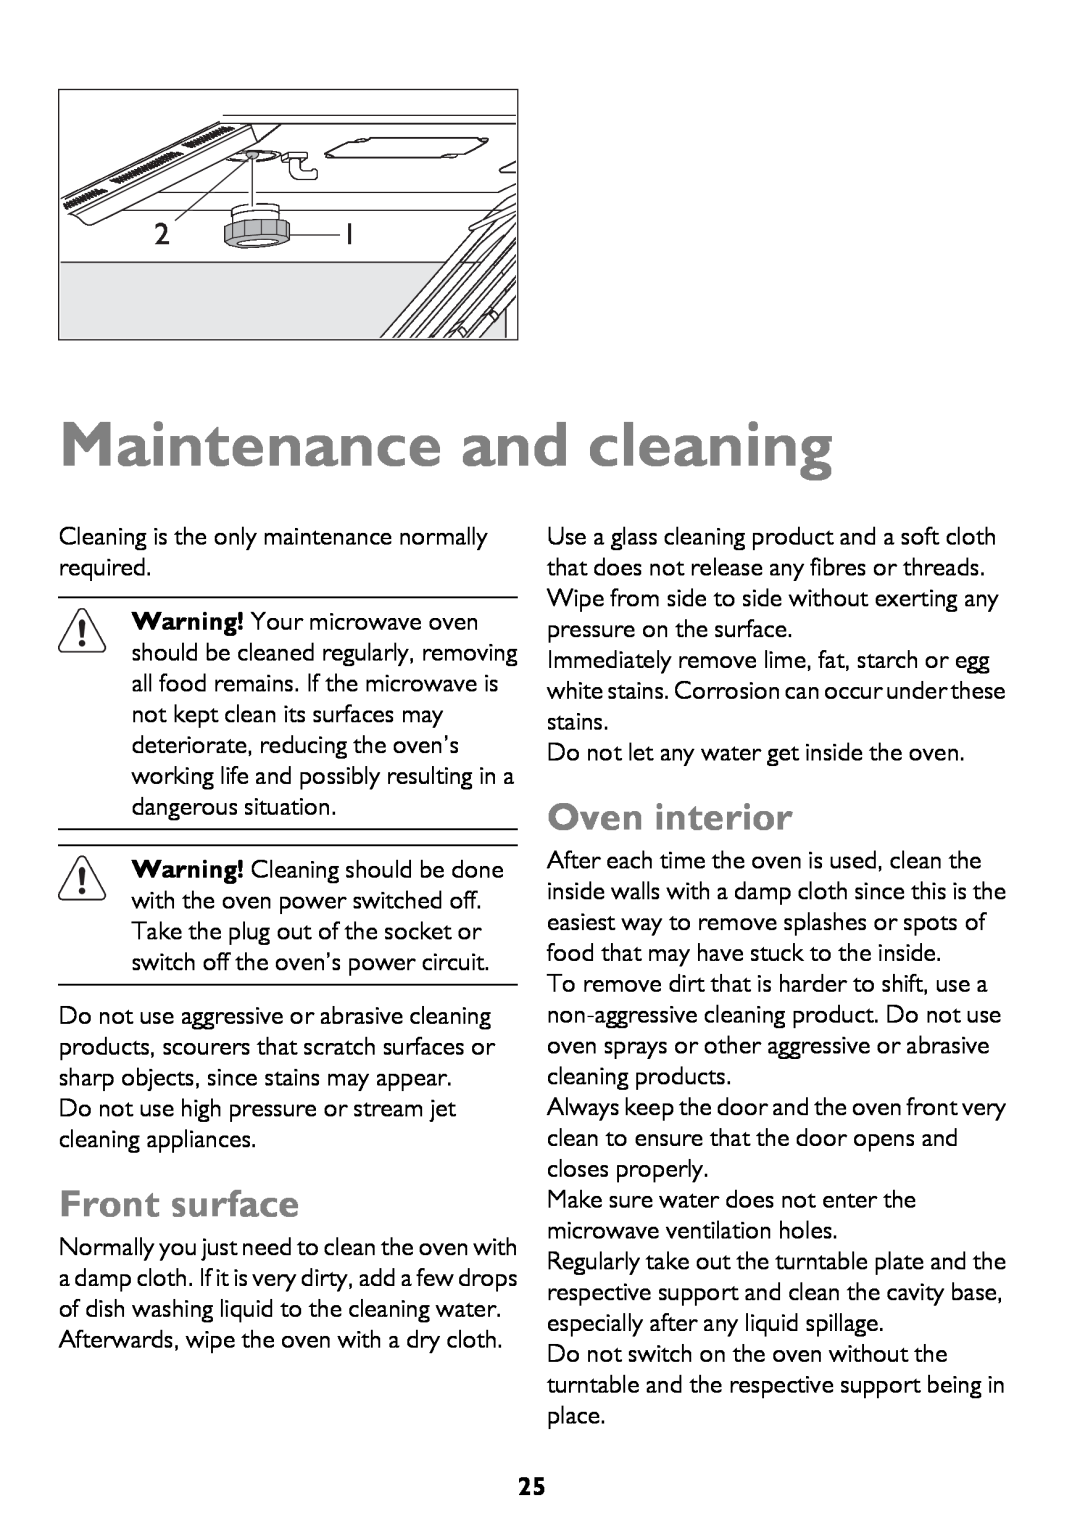 John Lewis JLBICO2 instruction manual Maintenance and cleaning, Front surface, Oven interior 